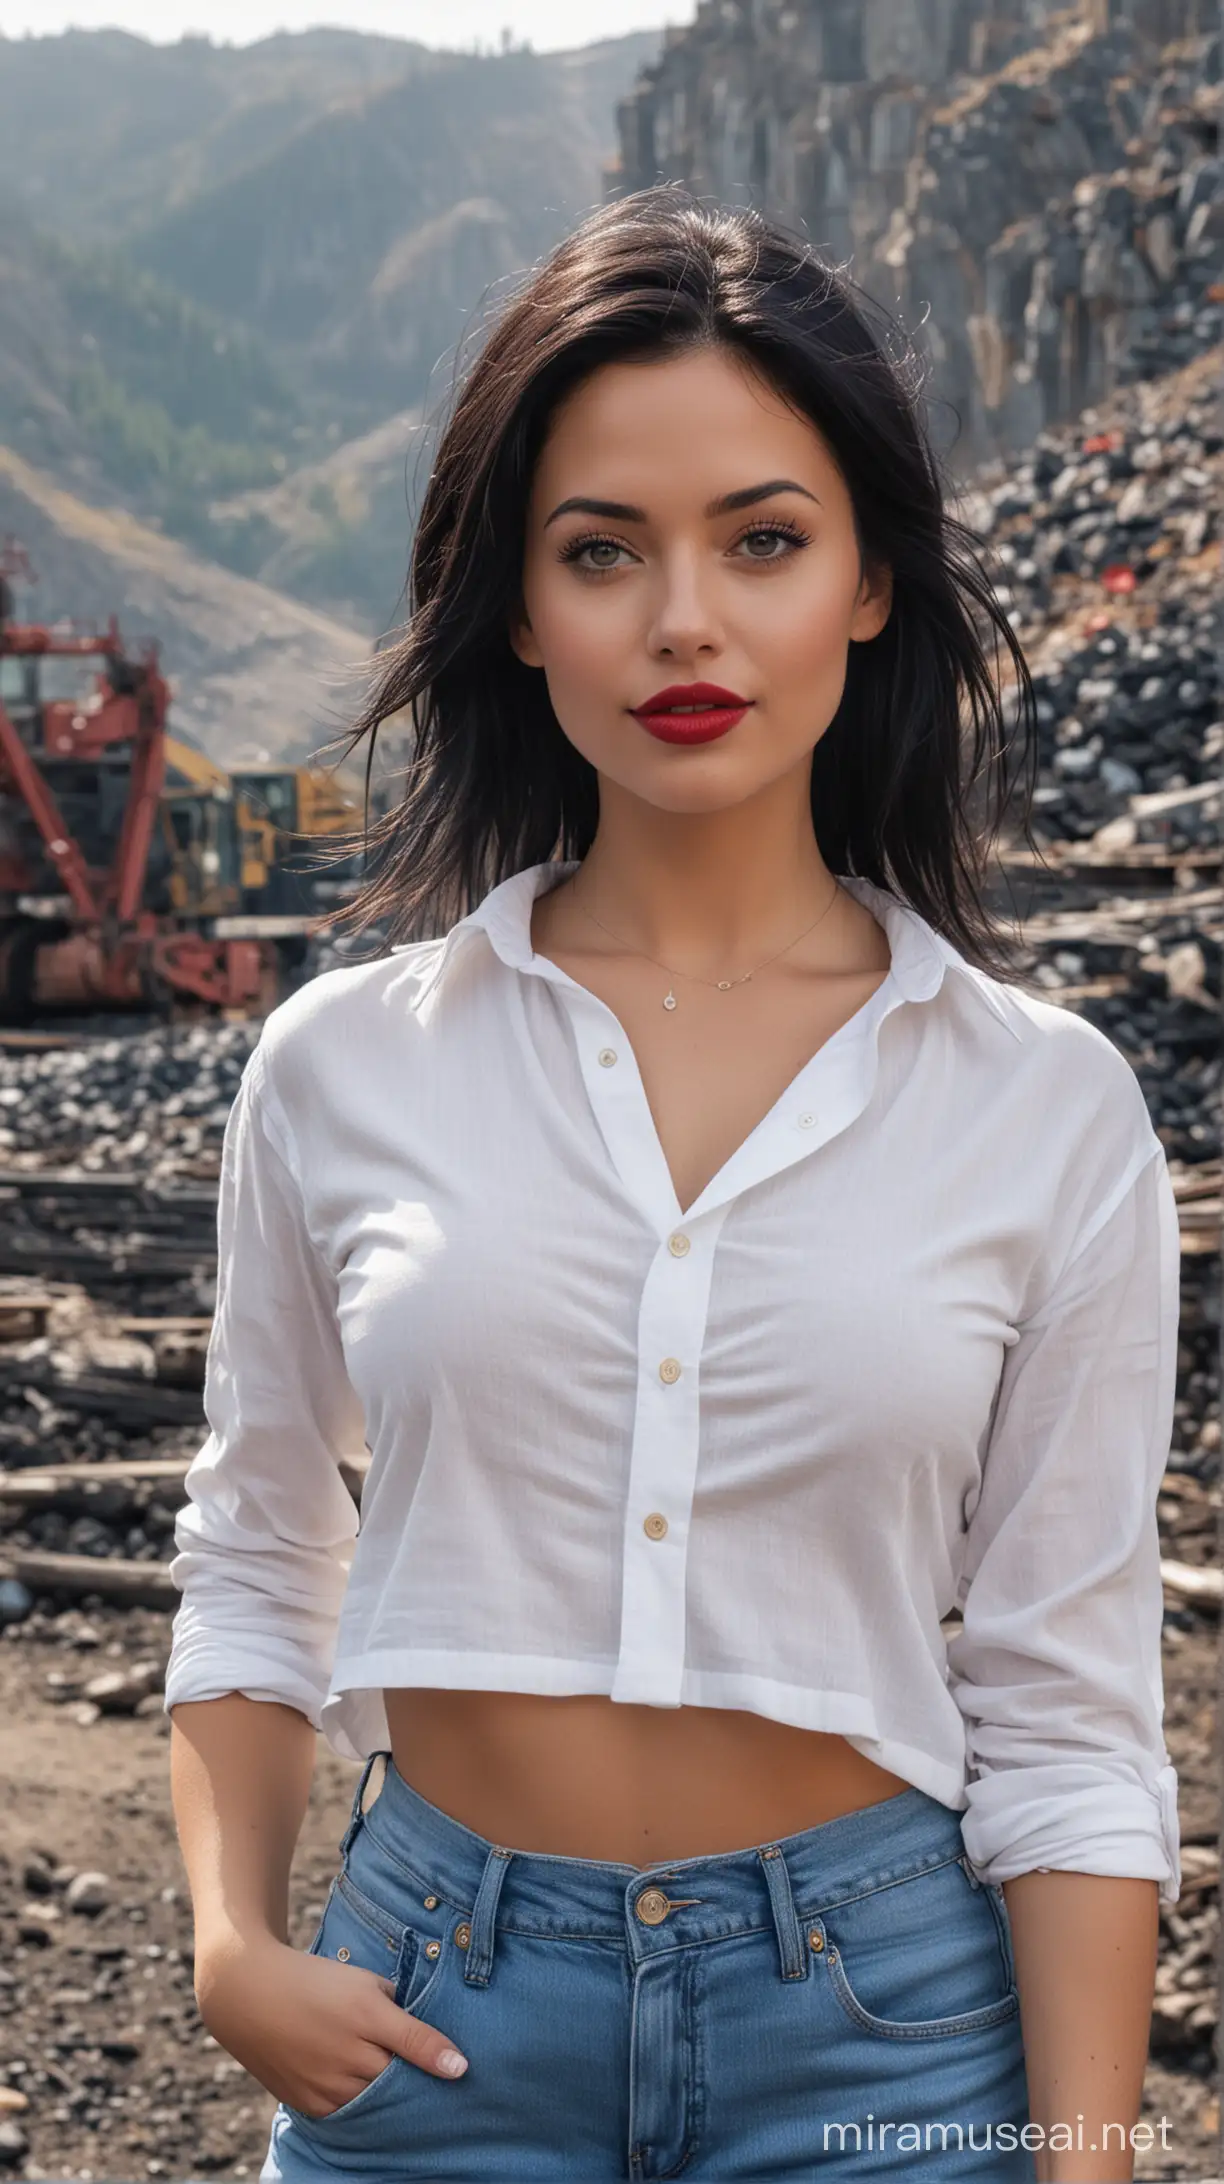 Beautiful USA Girl with Black Hair and Red Lipstick at Alaskas Crow Creek Mine